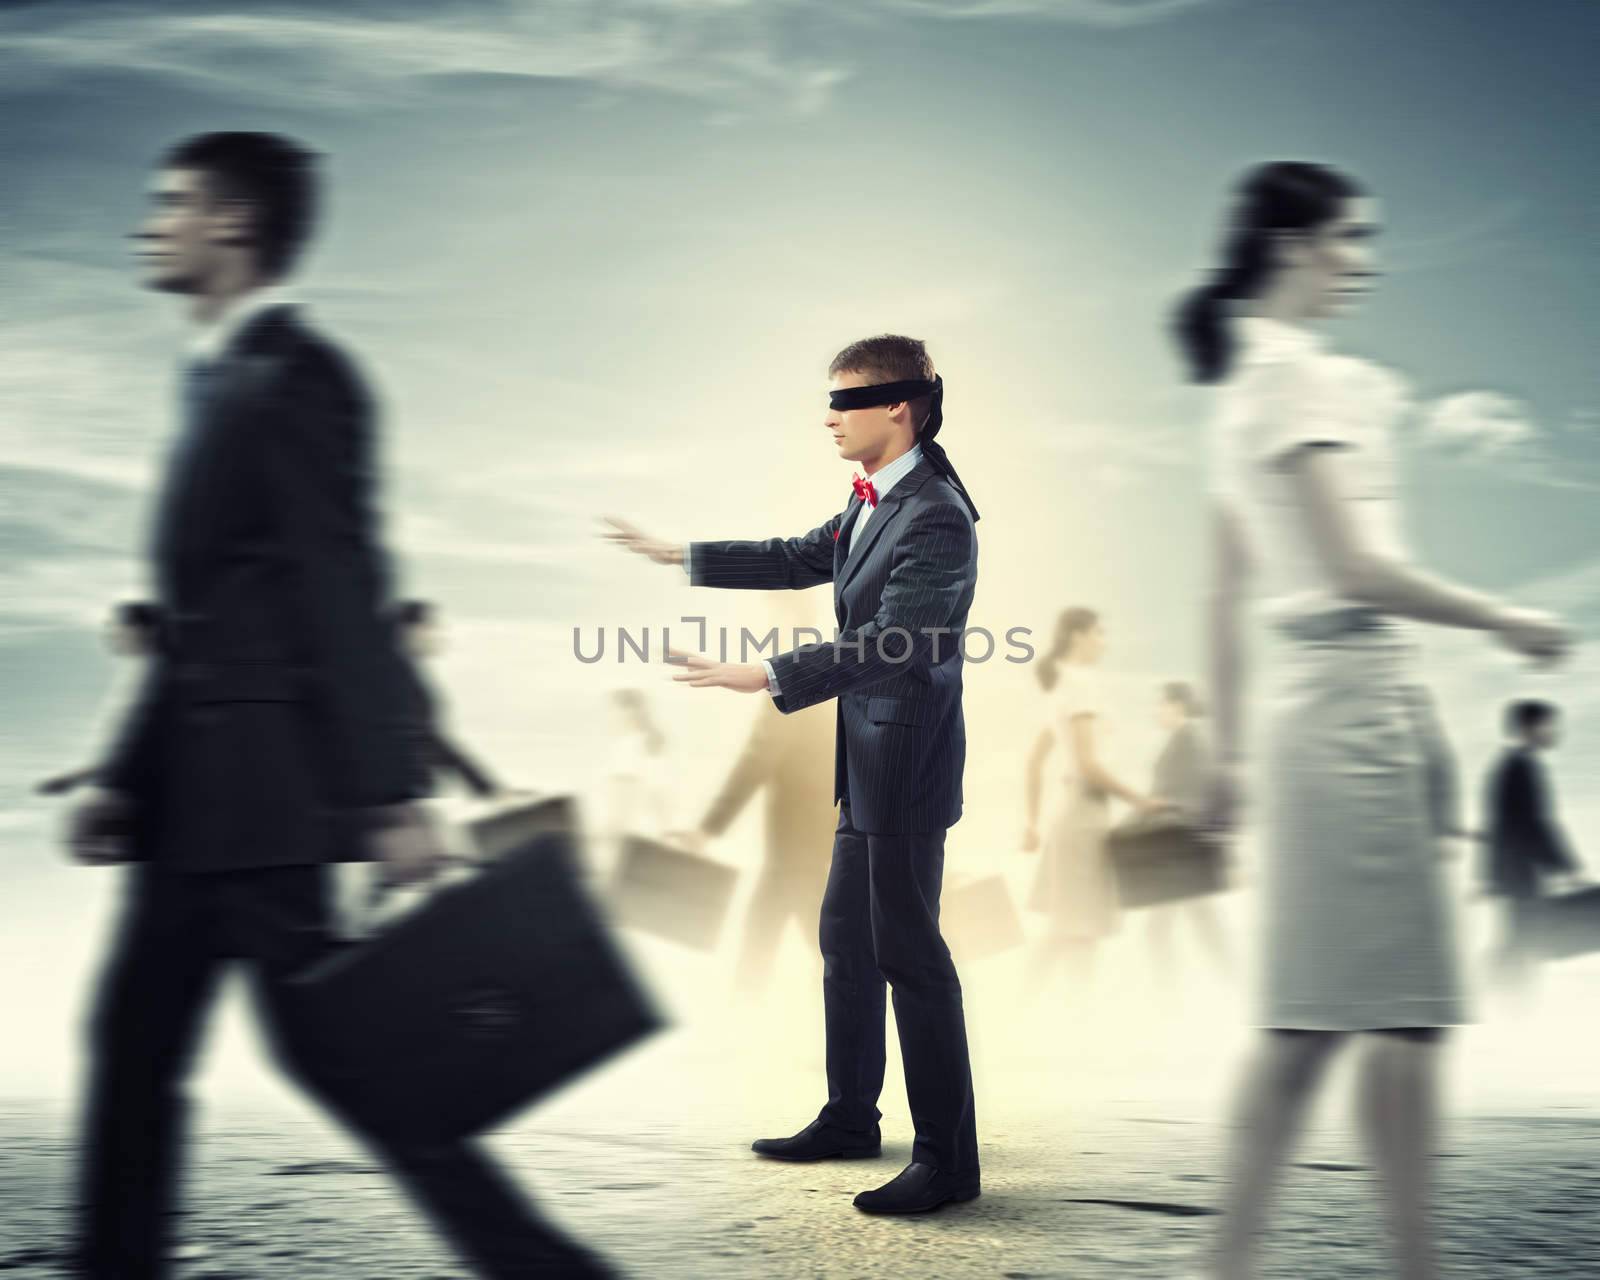 Image of businessman in blindfold walking among group of people